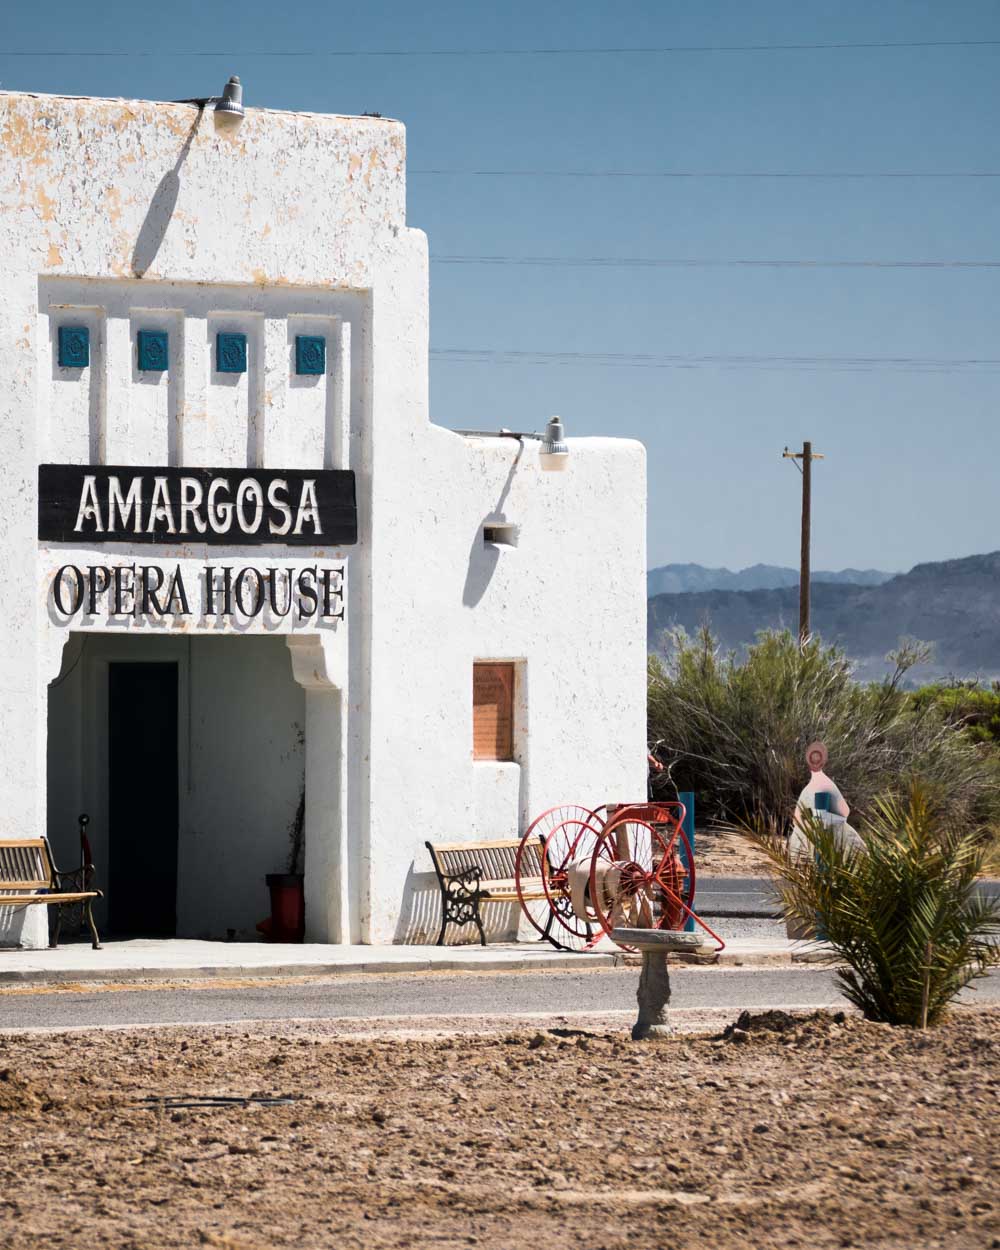 amargosa opera house and hotel in death valley